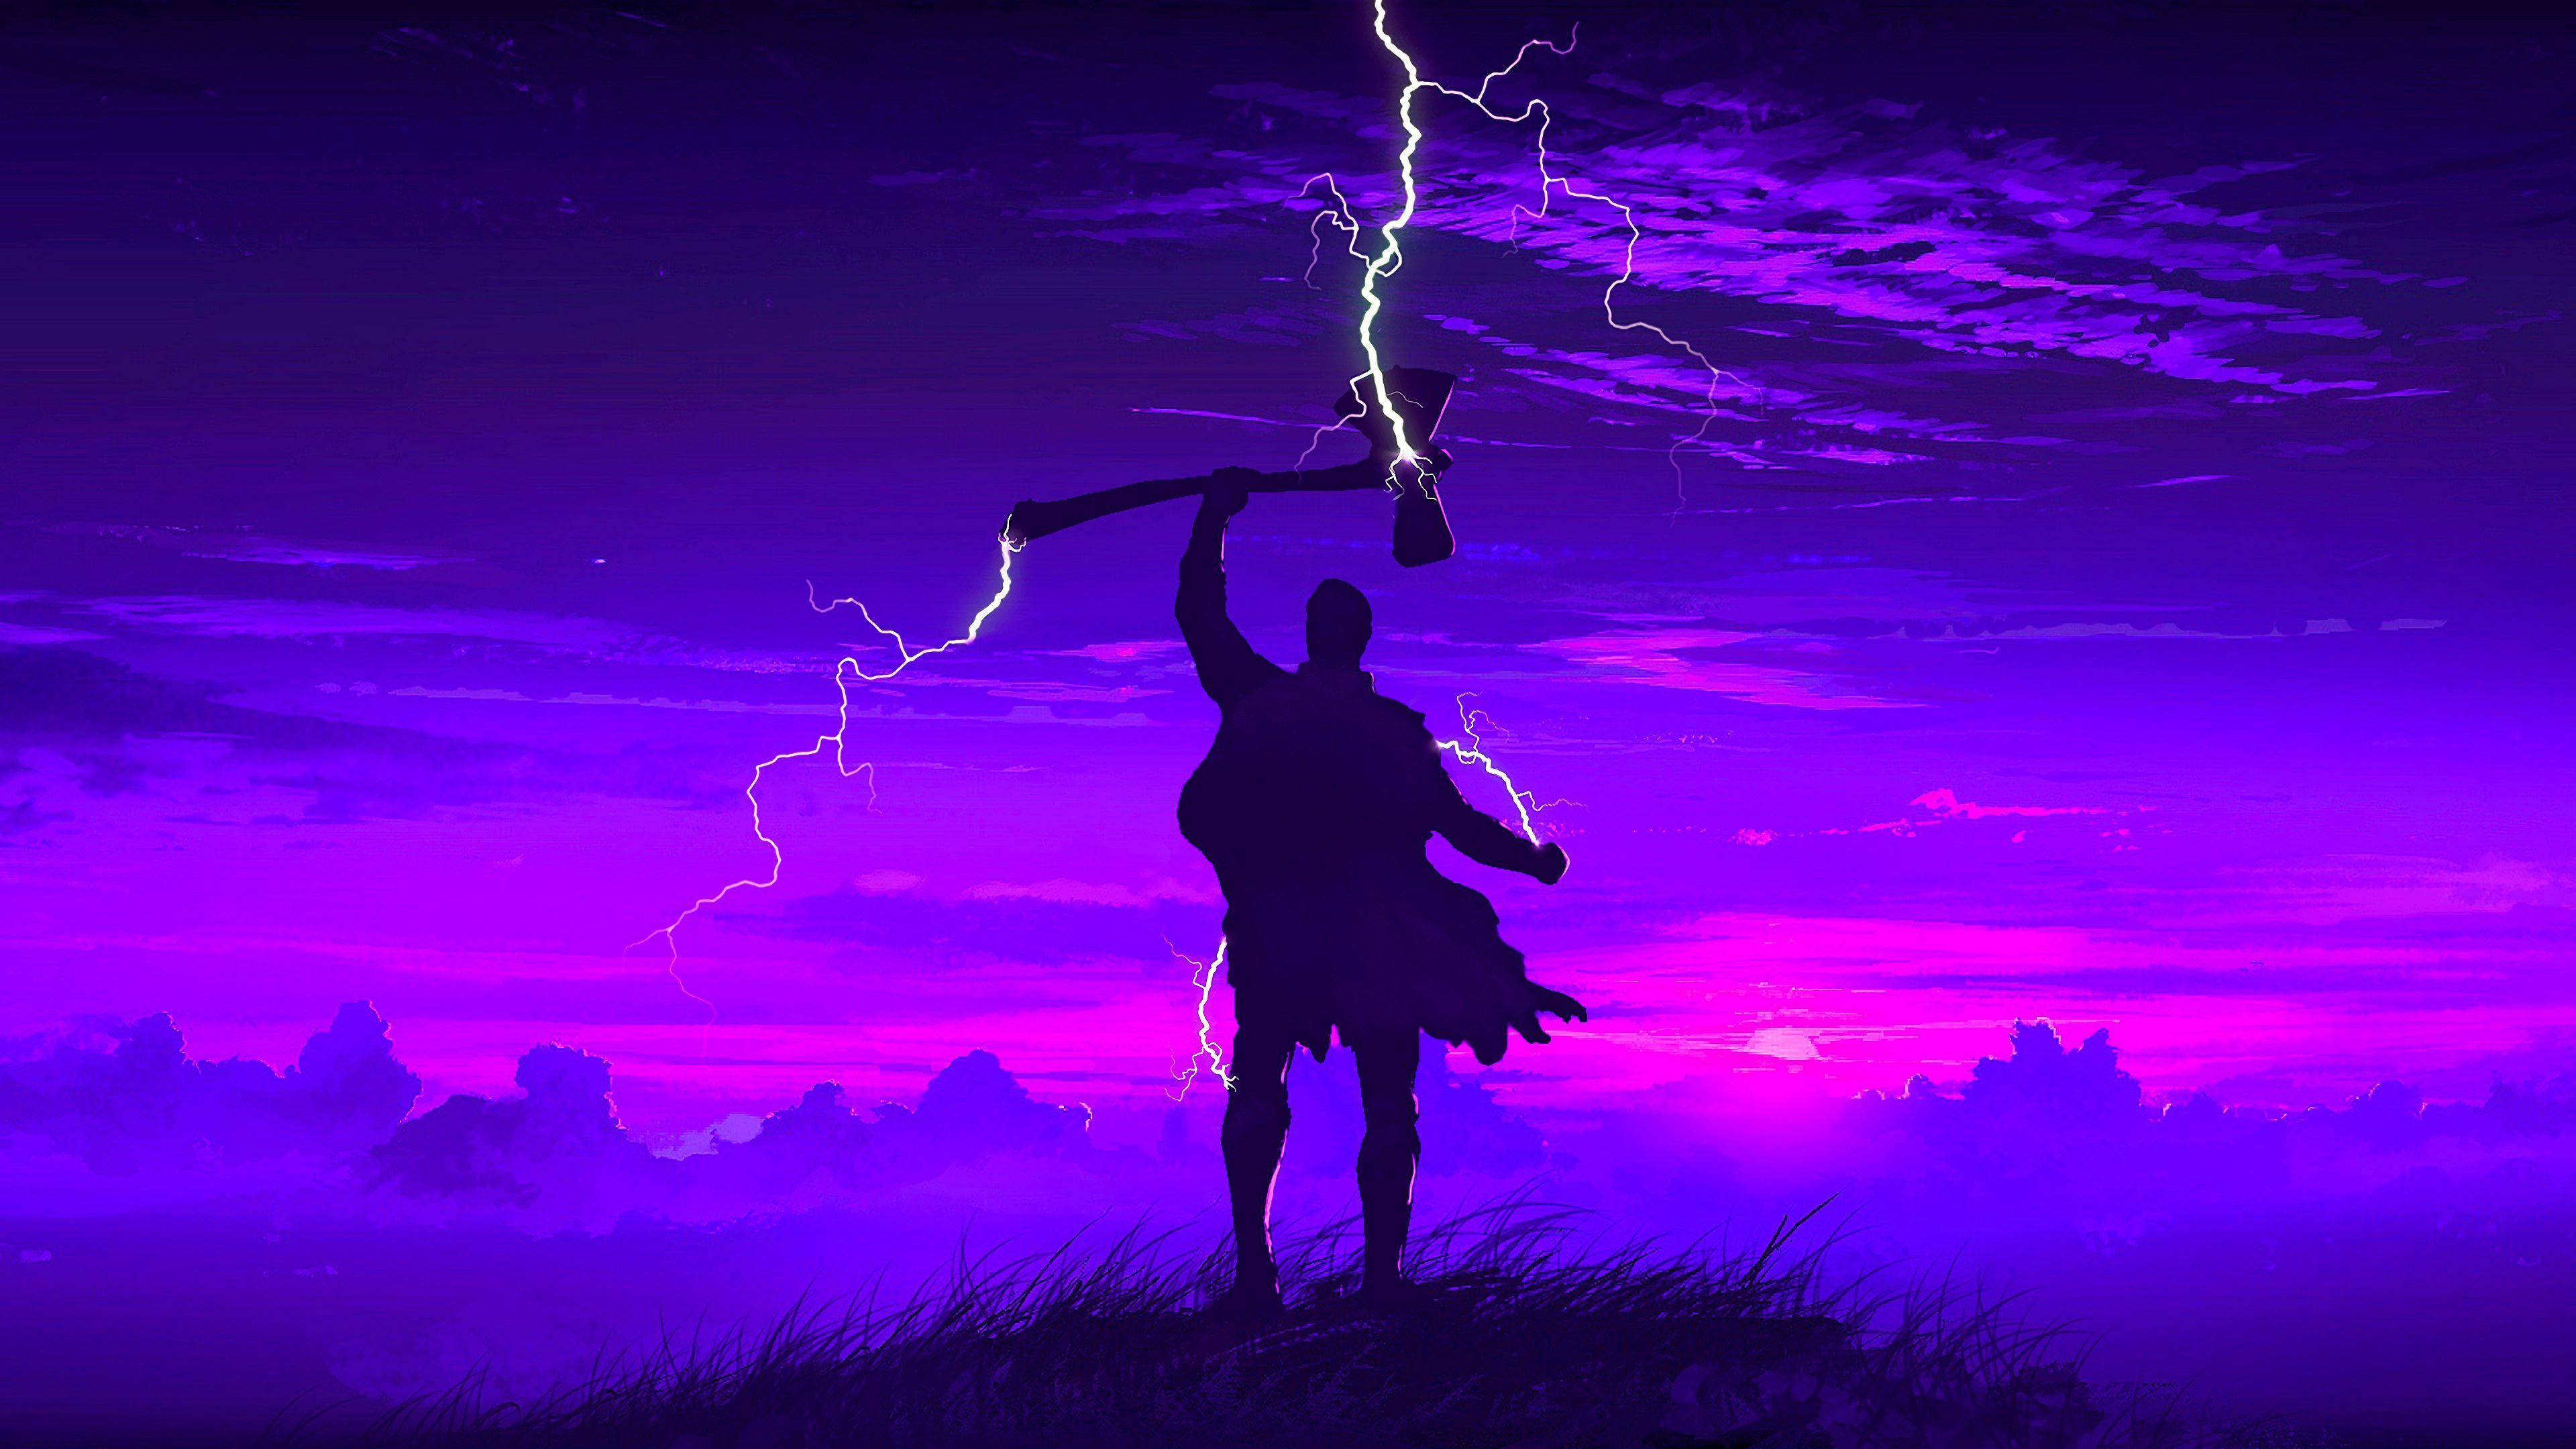 2560x1440 wallpaper of a silhouette of a man holding a hammer with lightning coming out of it, on a hillside with a purple sky - Thor